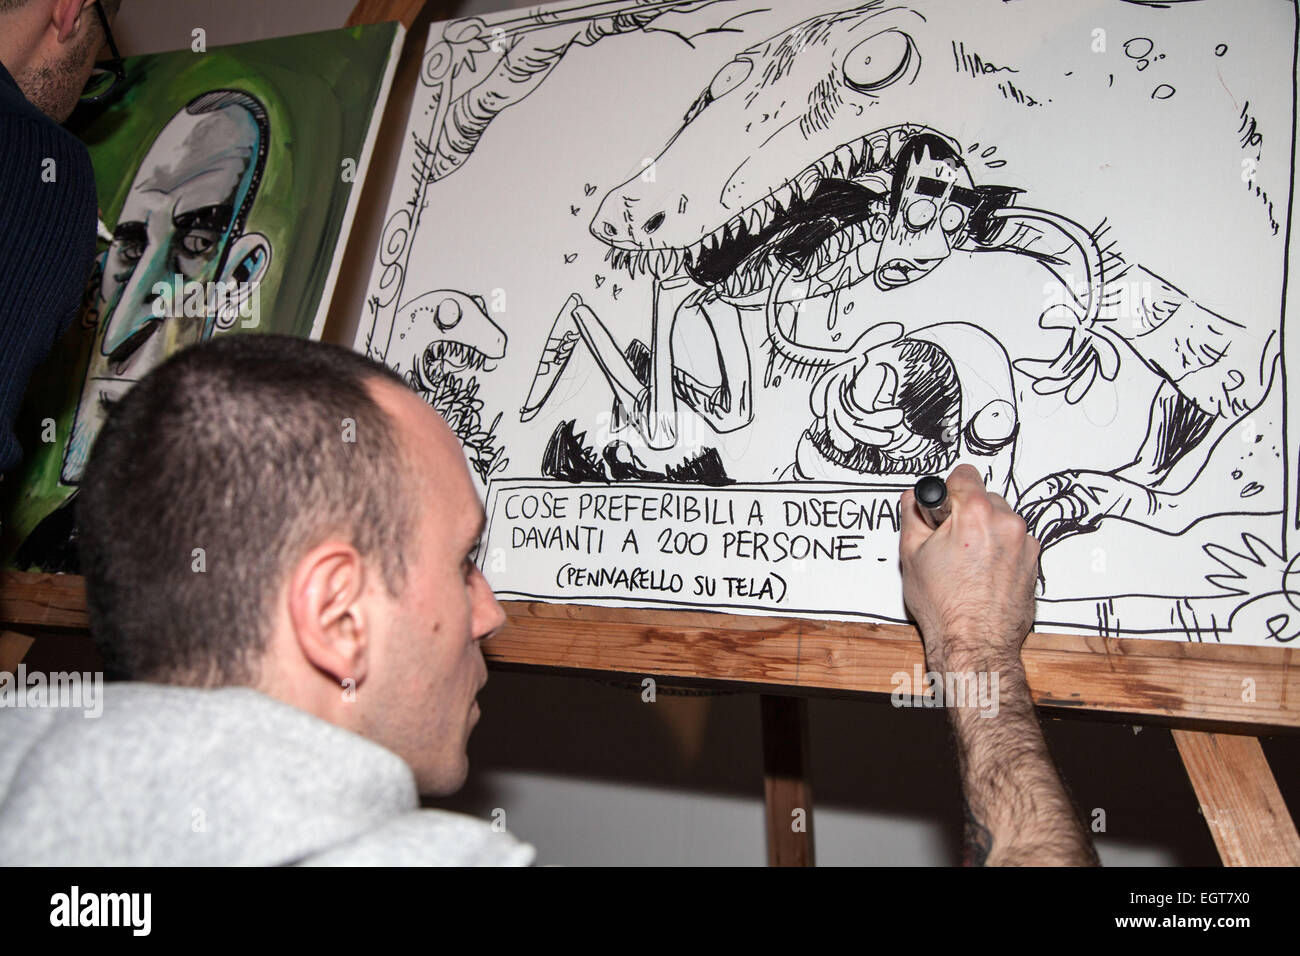 Zerocalcare (Aka Michele Rech) and a sample of his art work, the Italian cartoonist most followed at the moment, met his fans at TMO (Teatro Mediterraneo Occupato) to autograph his latest work 'Dimentica il mio nome' translated to 'Forget my name'. © Antonio Melita/Pacific Press/Alamy Live News Stock Photo